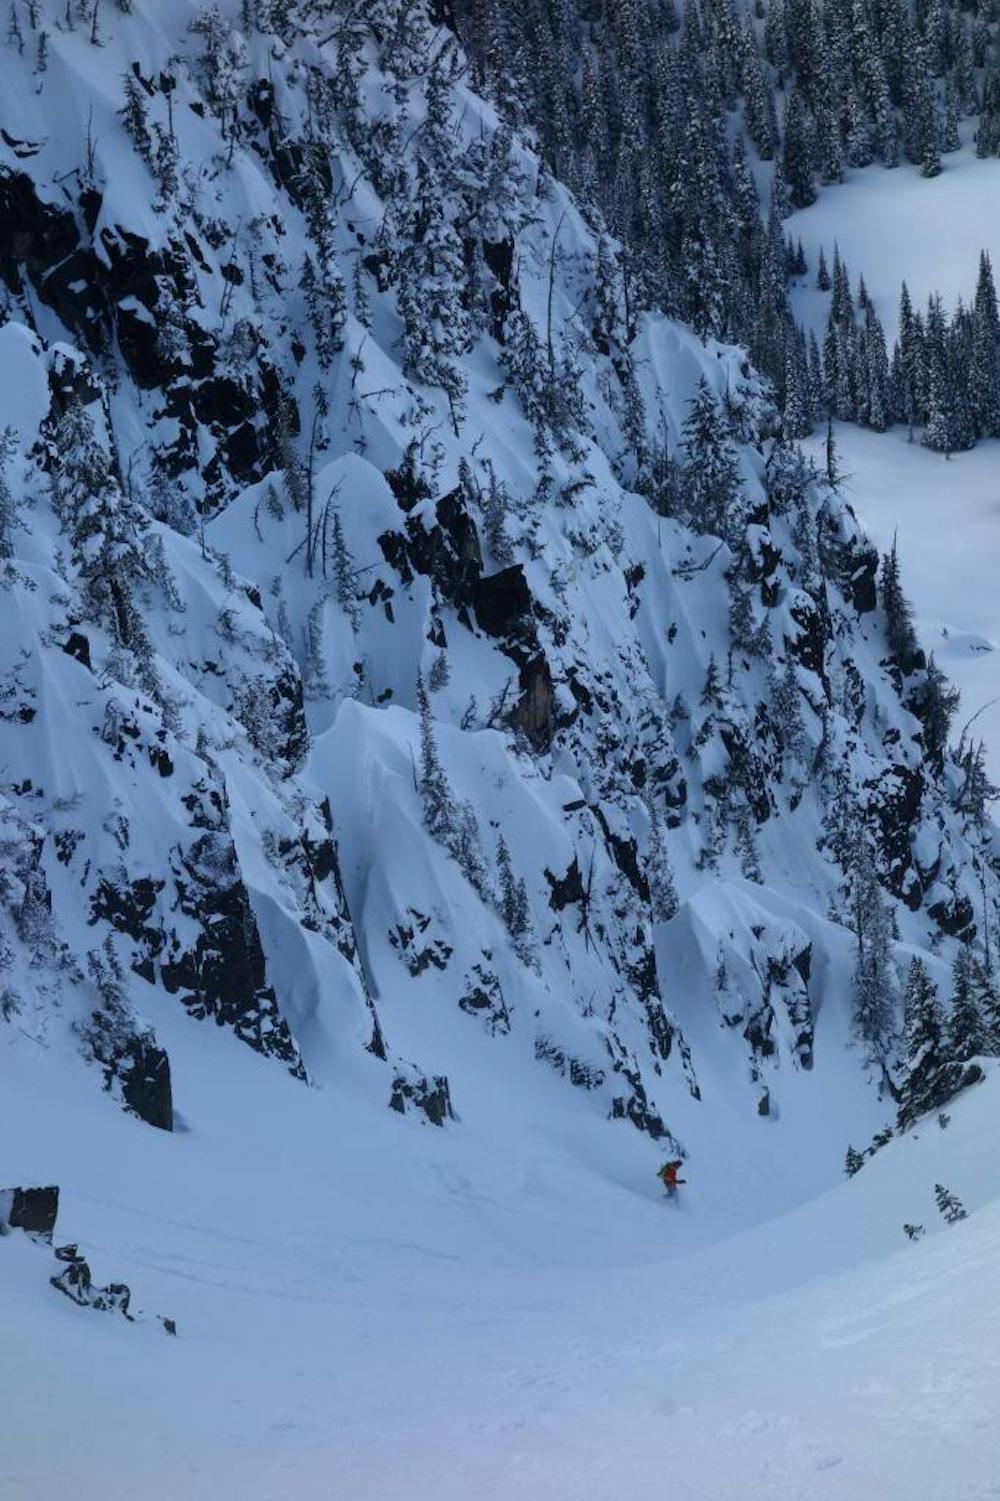 Dropping into the Palisade